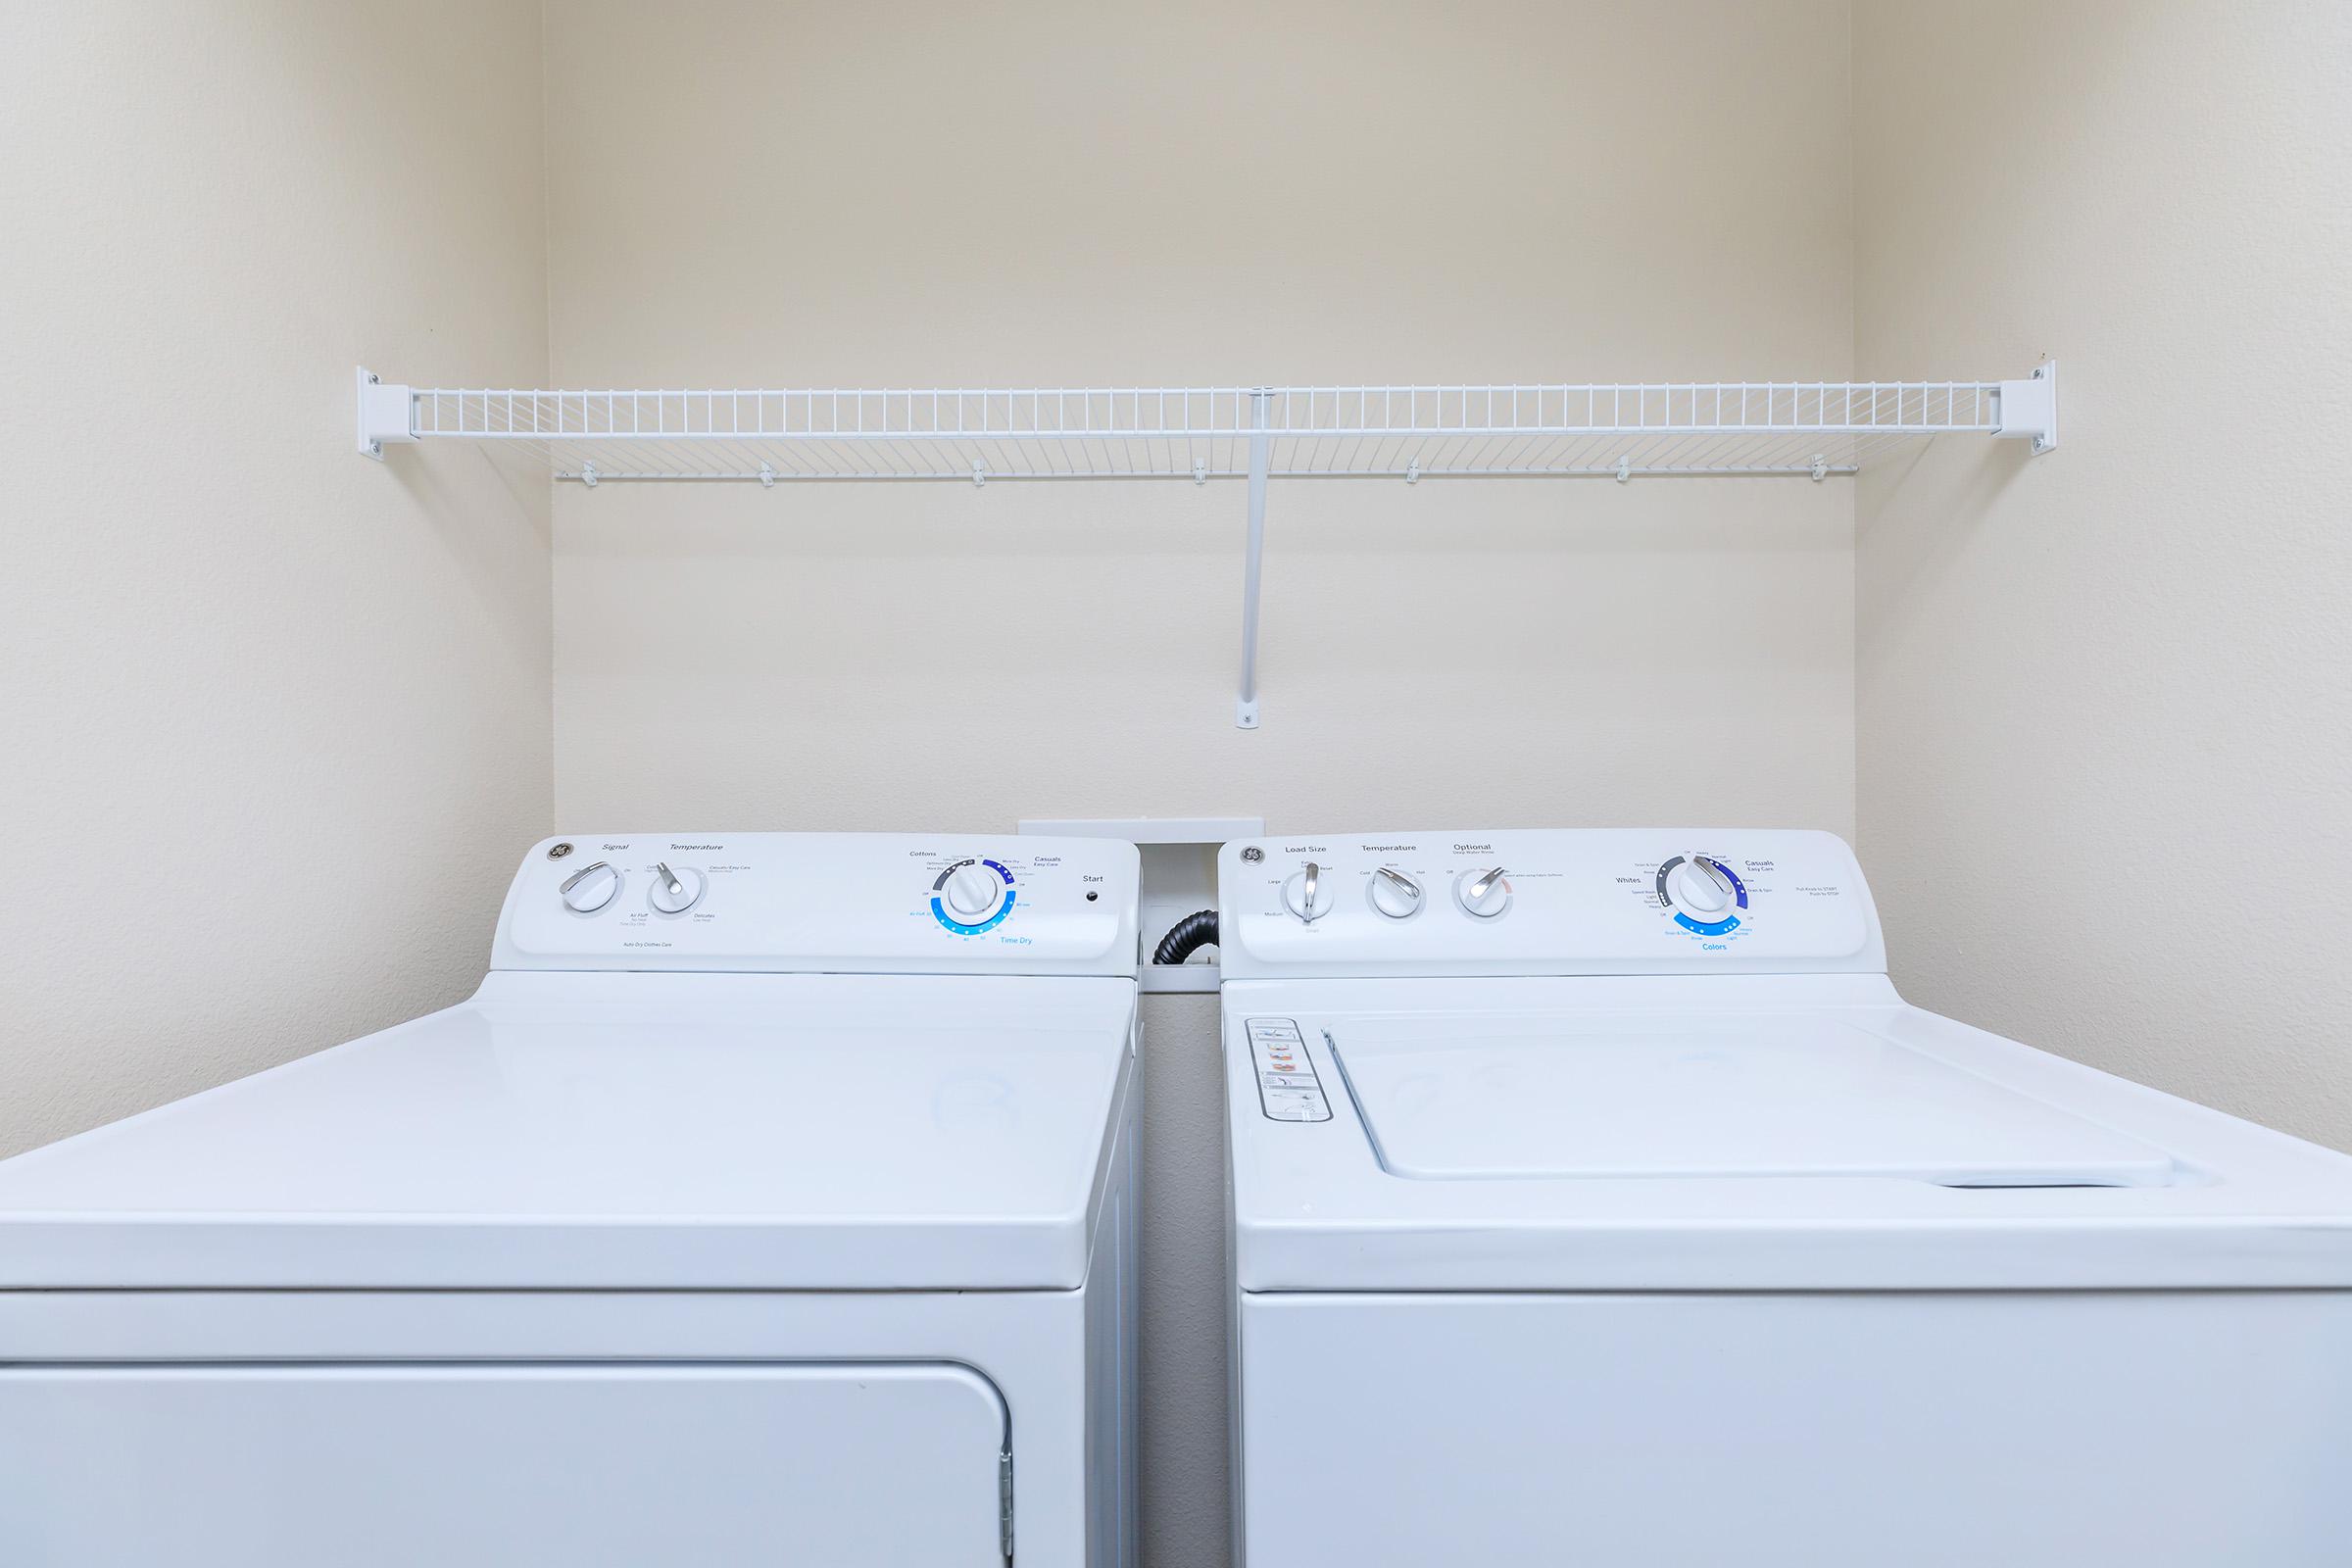 washer and dryer in the laundry room